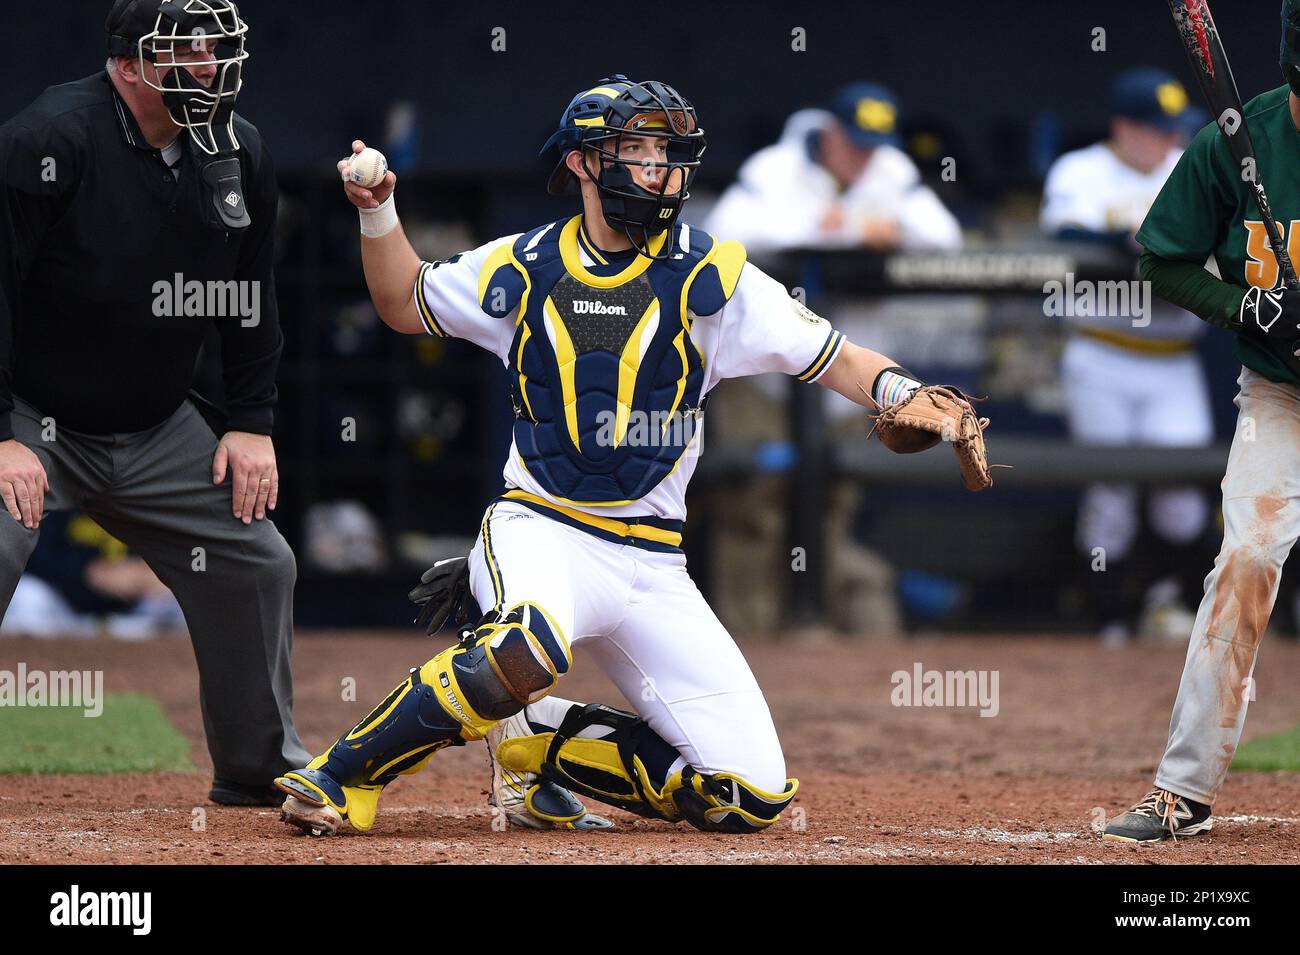 https://c8.alamy.com/comp/2P1X9XC/michigan-wolverines-catcherinfielder-drew-lugbauer-17-during-the-second-game-of-a-doubleheader-against-the-siena-saints-on-february-27-2015-at-tradition-field-in-st-lucie-florida-michigan-defeated-siena-6-0-mike-janesfour-seam-images-via-ap-images-2P1X9XC.jpg